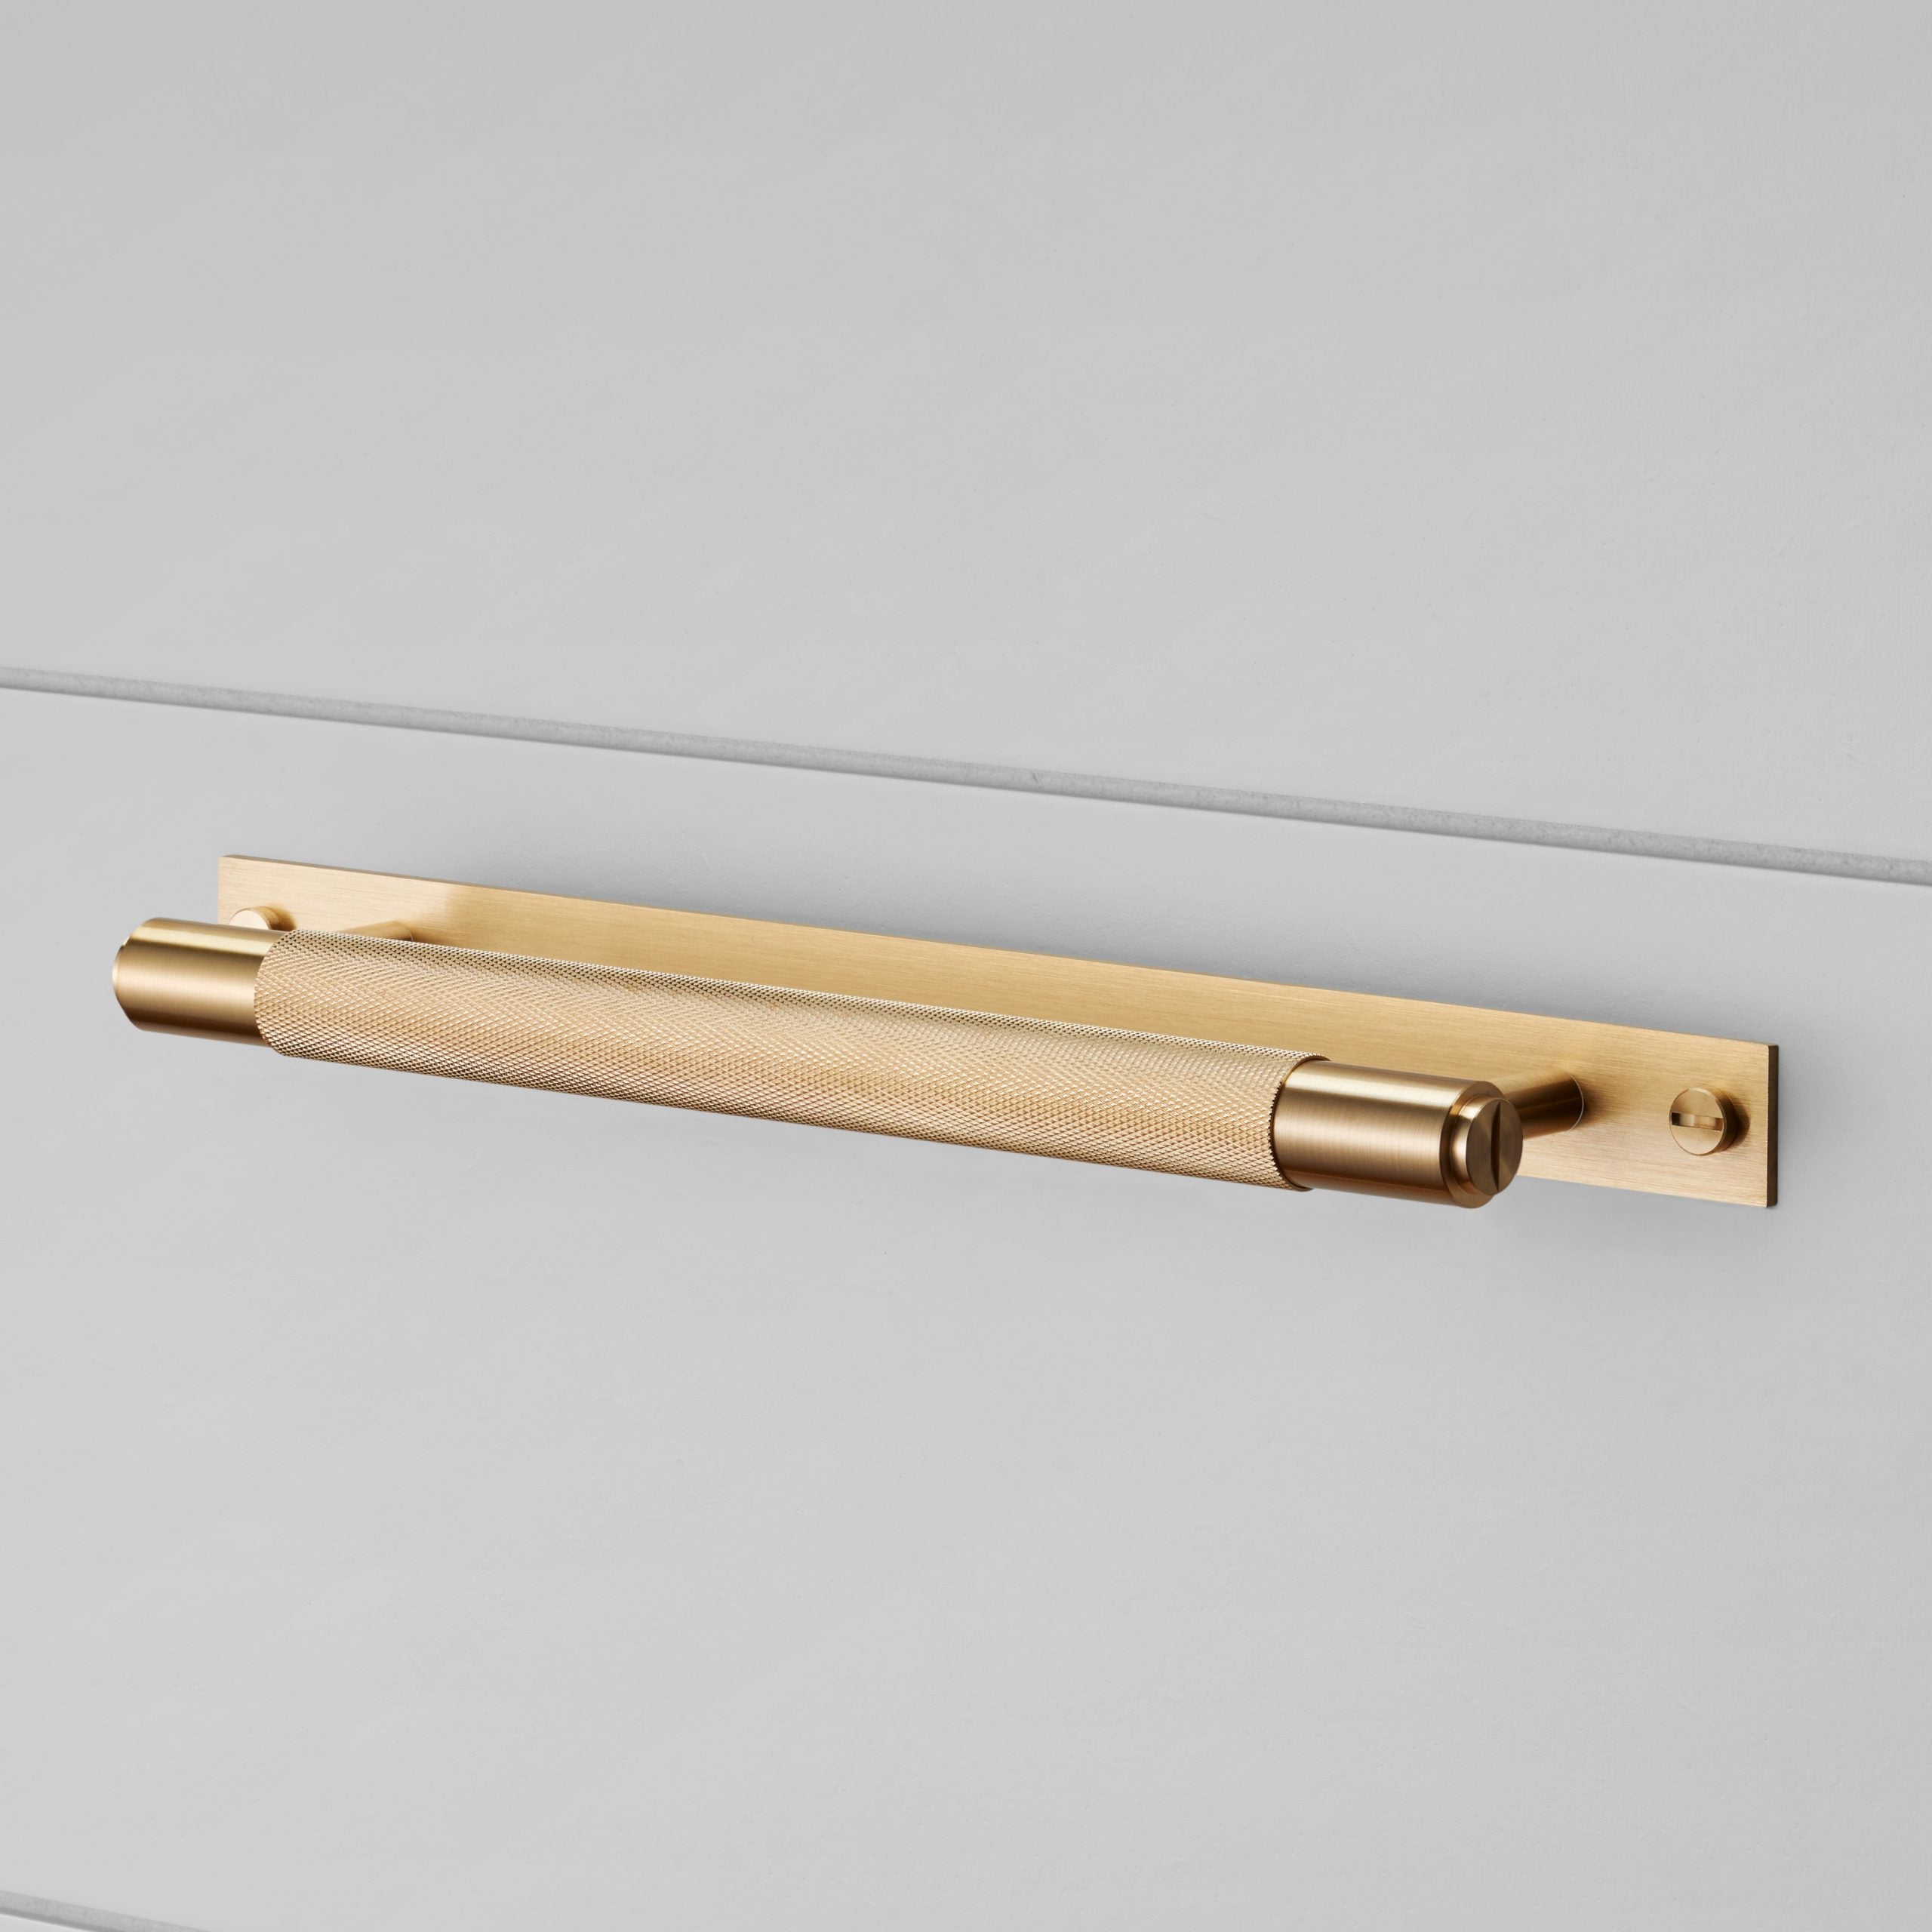 Buster + Punch Pull Bar, Cross Design Hardware Buster + Punch Brass 0.32x0.07x0.03 